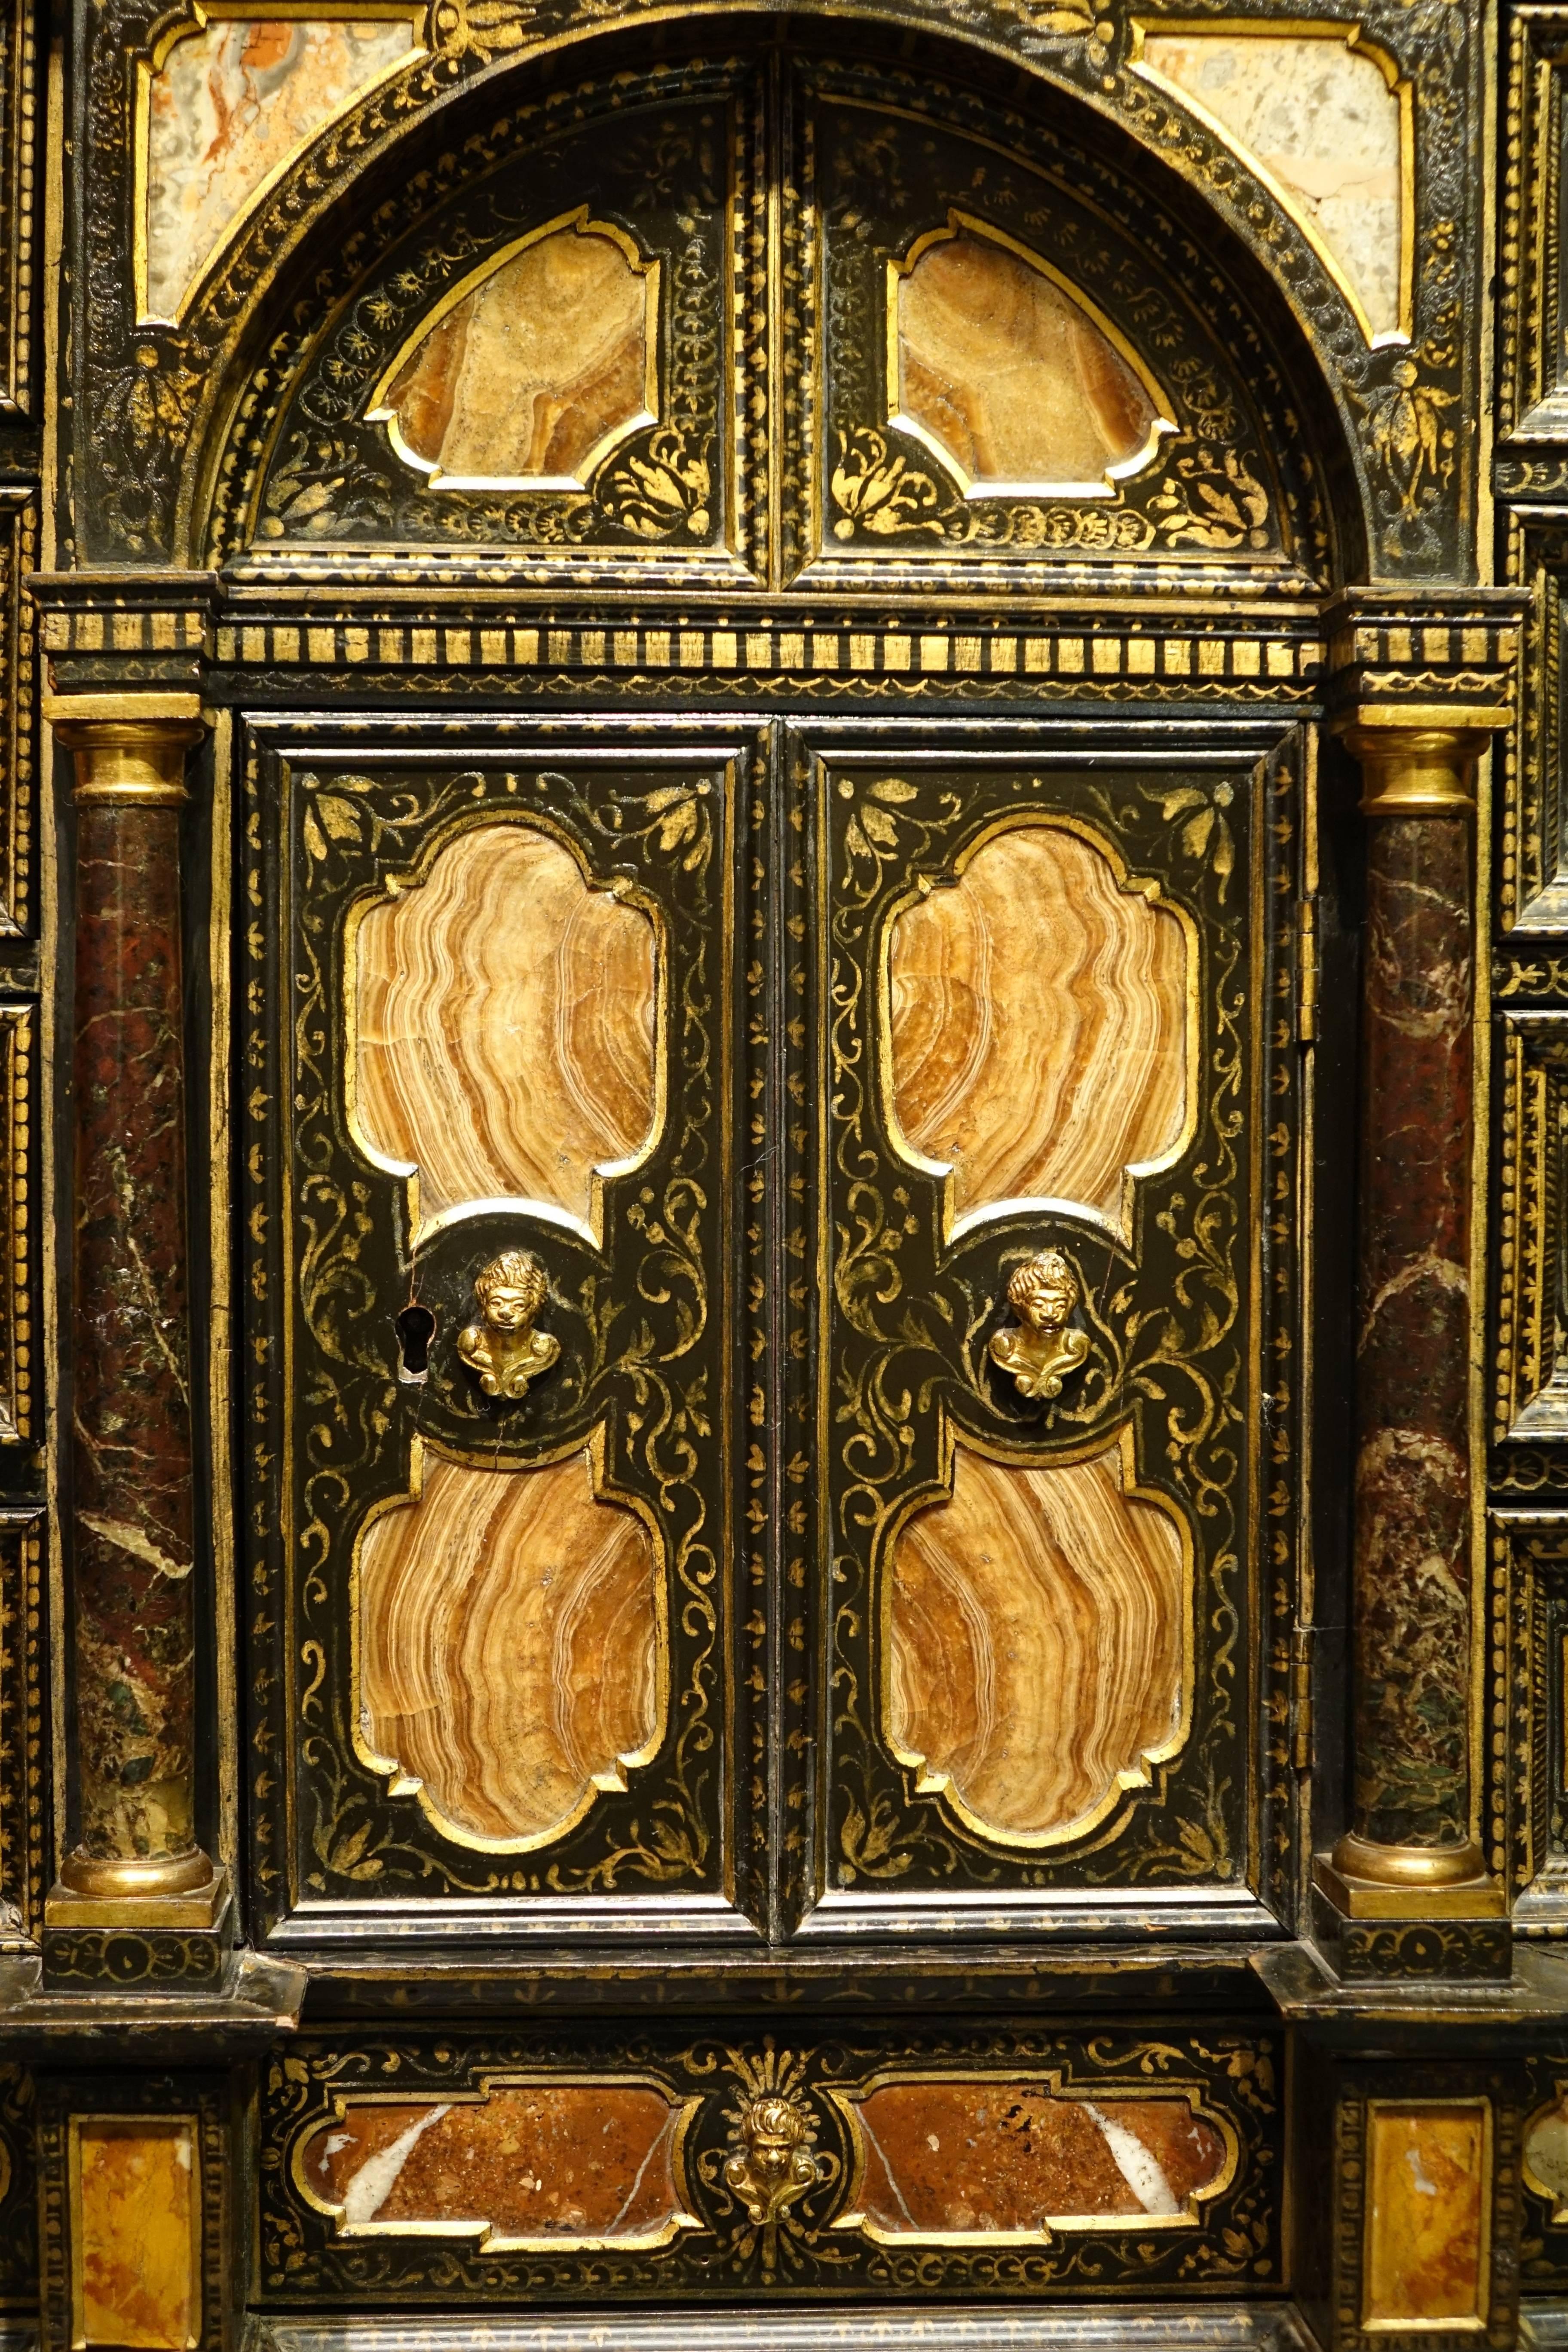 Rare florentine cabinet in marquetry of precious stones, ebony veneer and blackened wood, circa 1800, Italy.
This cabinet executed in precious wood and dressed with panels called "de opera di commesso di pietre" (semi-precious stones